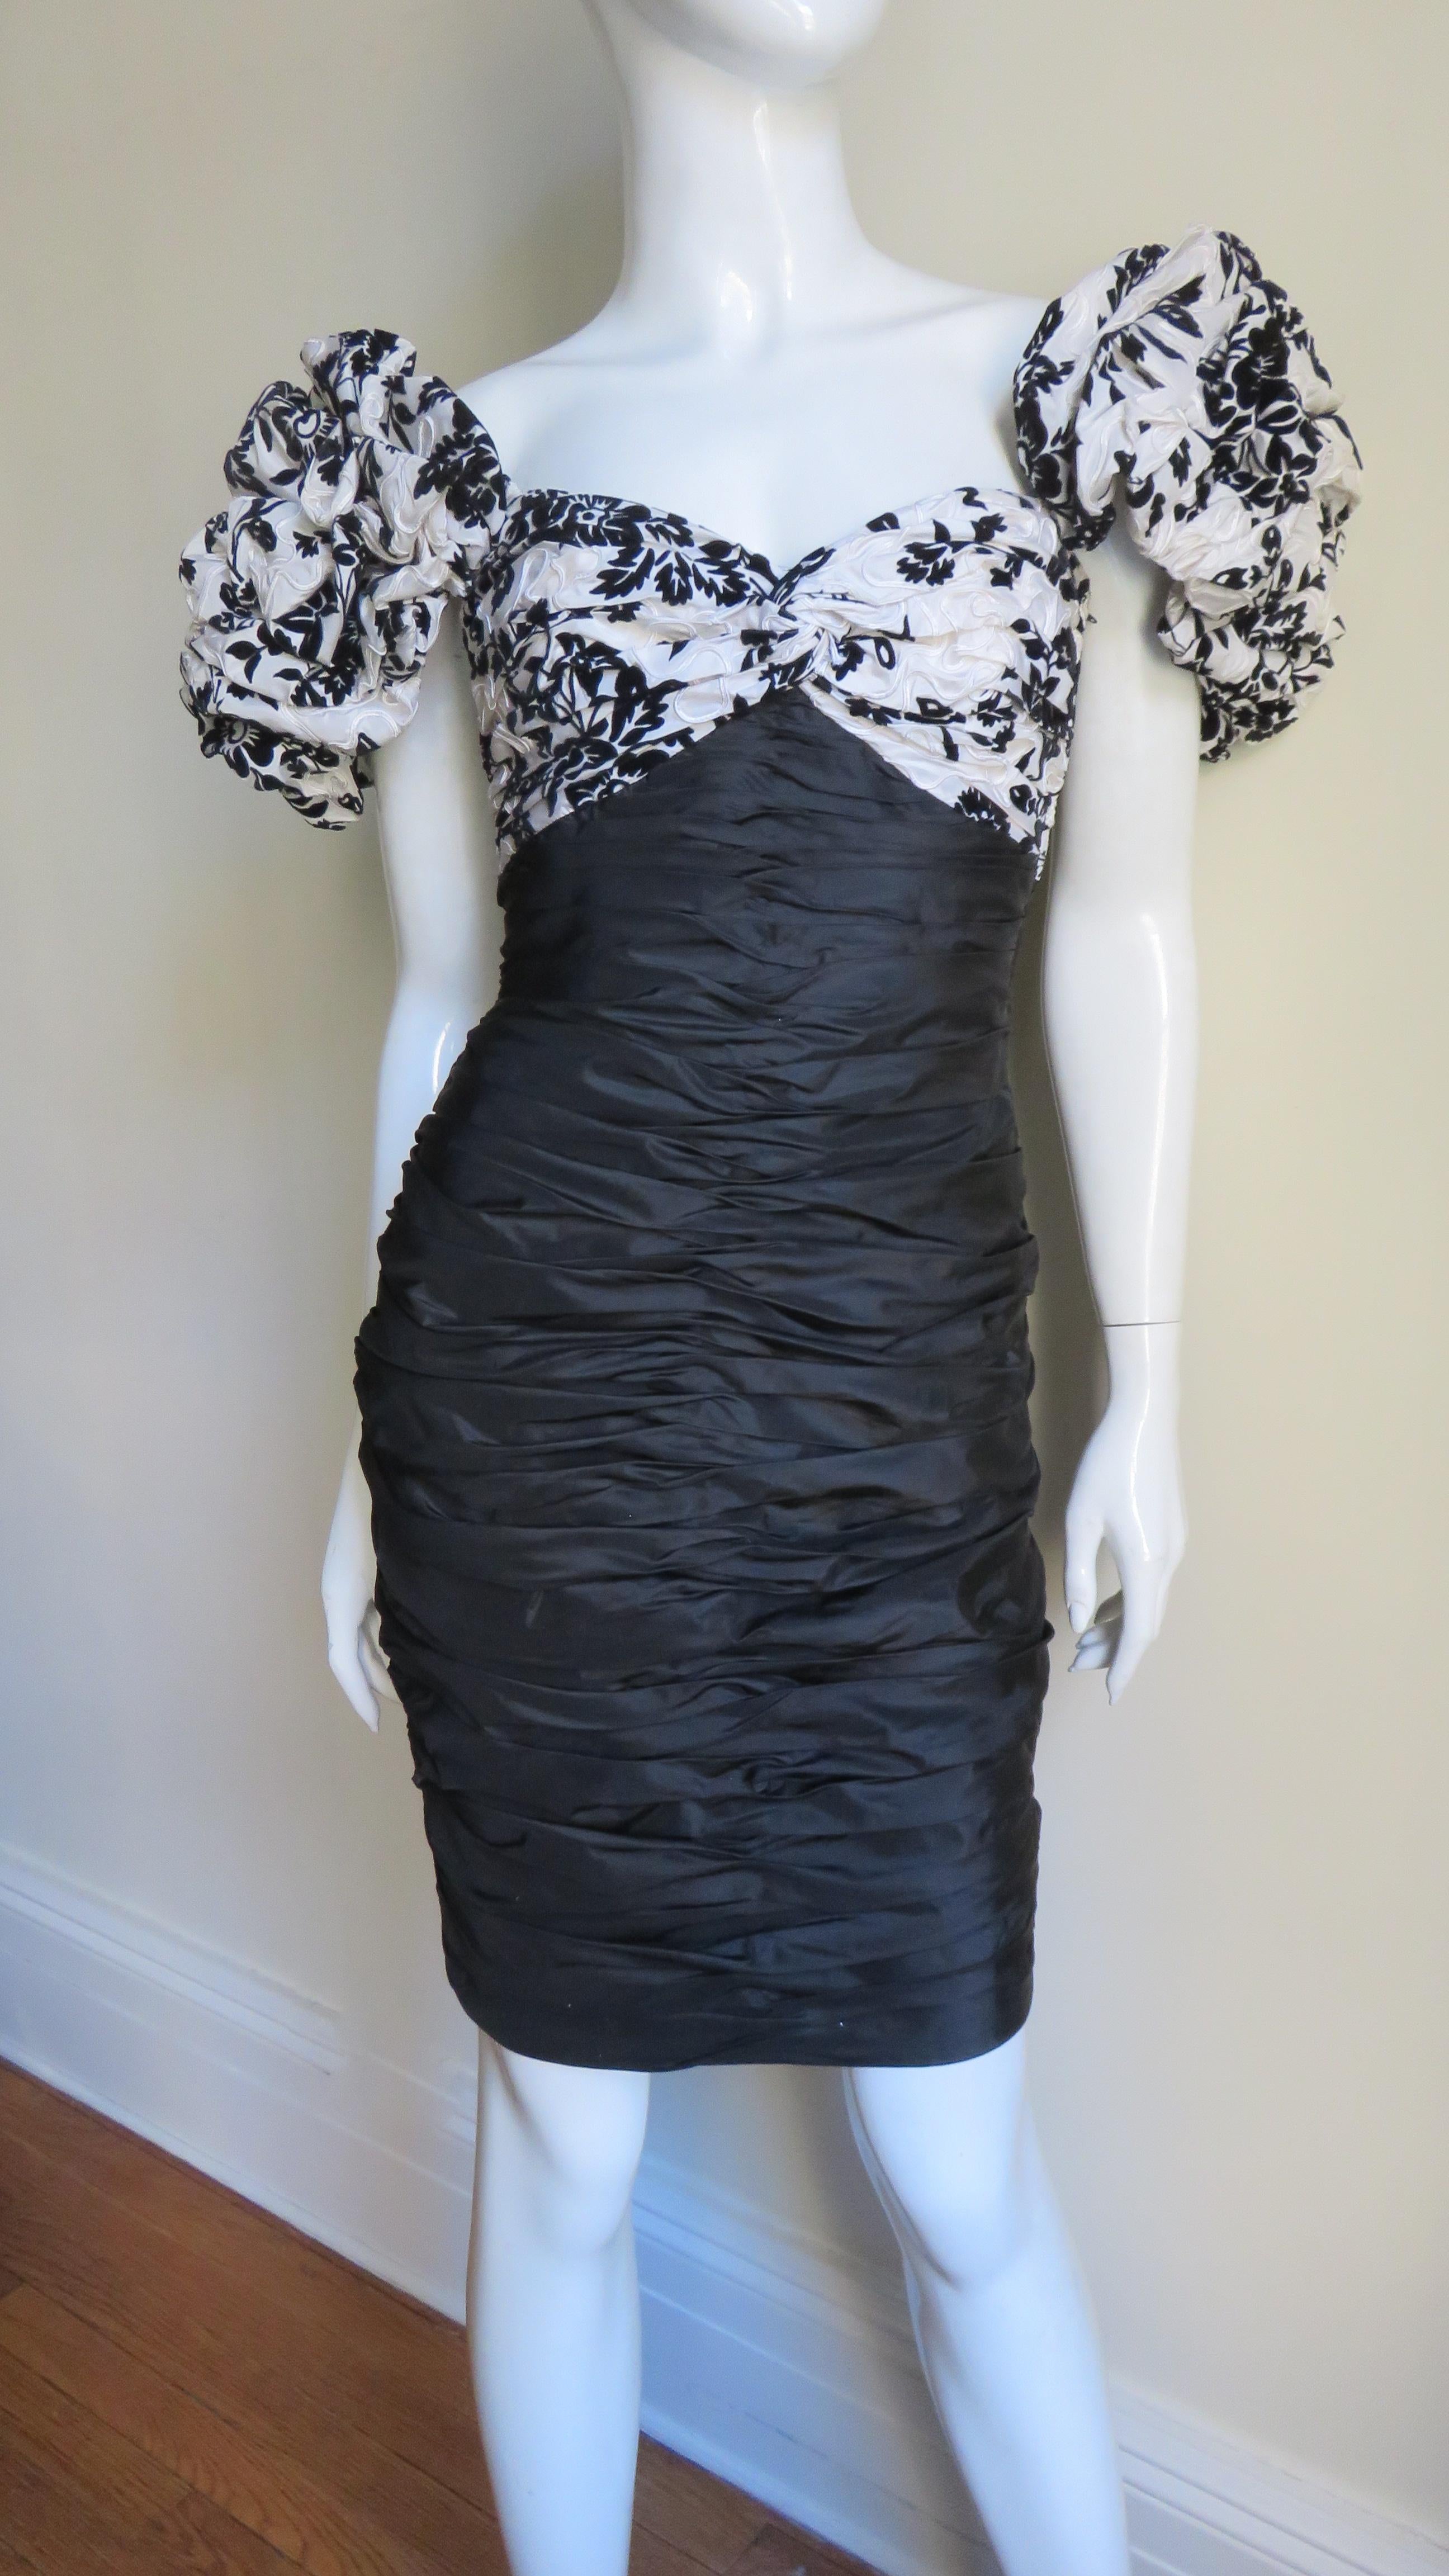 A beautiful black and white silk dress from Vicky Tiel's Couture collection.  It has a ruched sweetheart neckline, a scoop back, and puff short sleeves all in a black flocked flower pattern on a white background. The skirt portion is solid black and